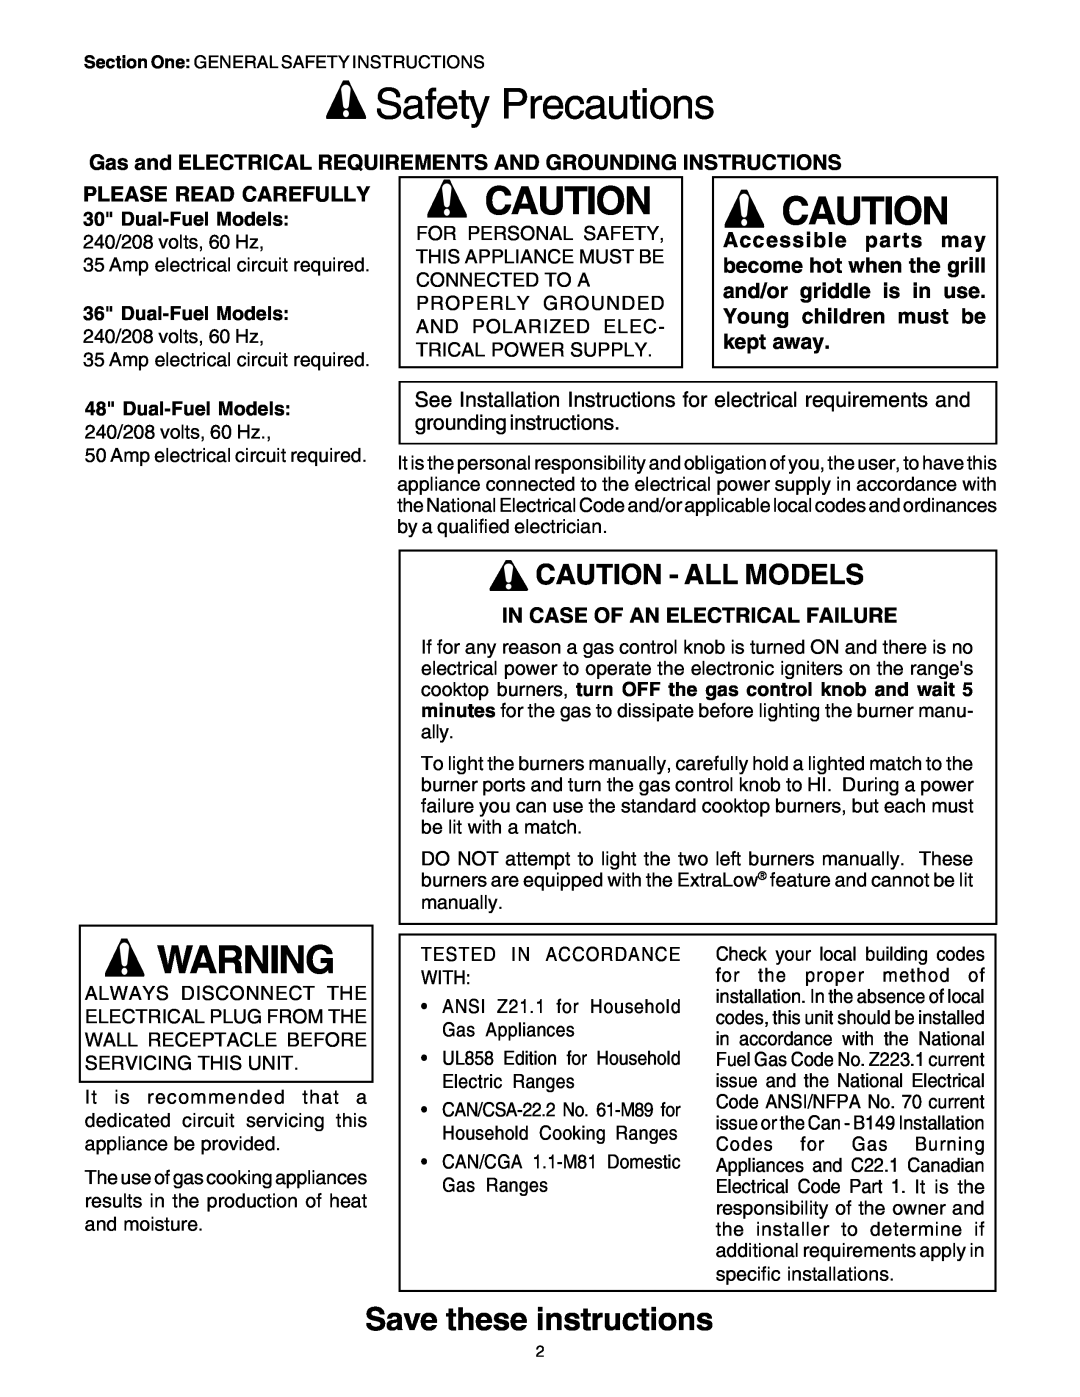 Thermador PRD36, PRD48, PRD30 Safety Precautions, Save these instructions, Caution - All Models, Please Read Carefully 